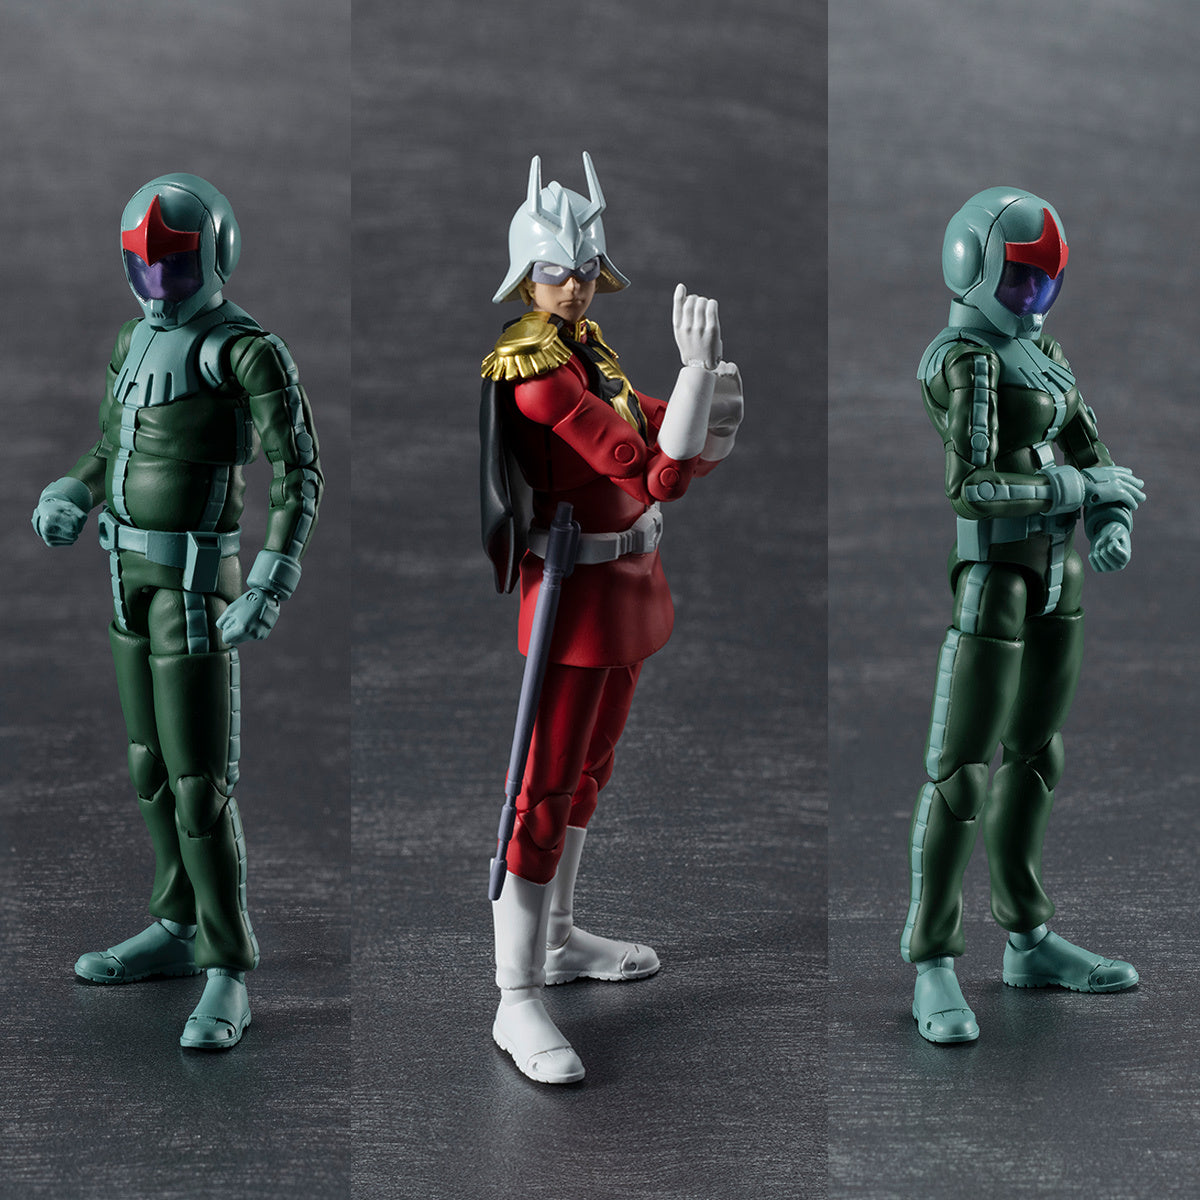 GUNDAM - G.M.G. PRINCIPALITY OF ZEON ARMY SOLDIER 04-06 NORMAL SUIT SOLDIER & CHAR AZNABLE SET [WITH GIFT]